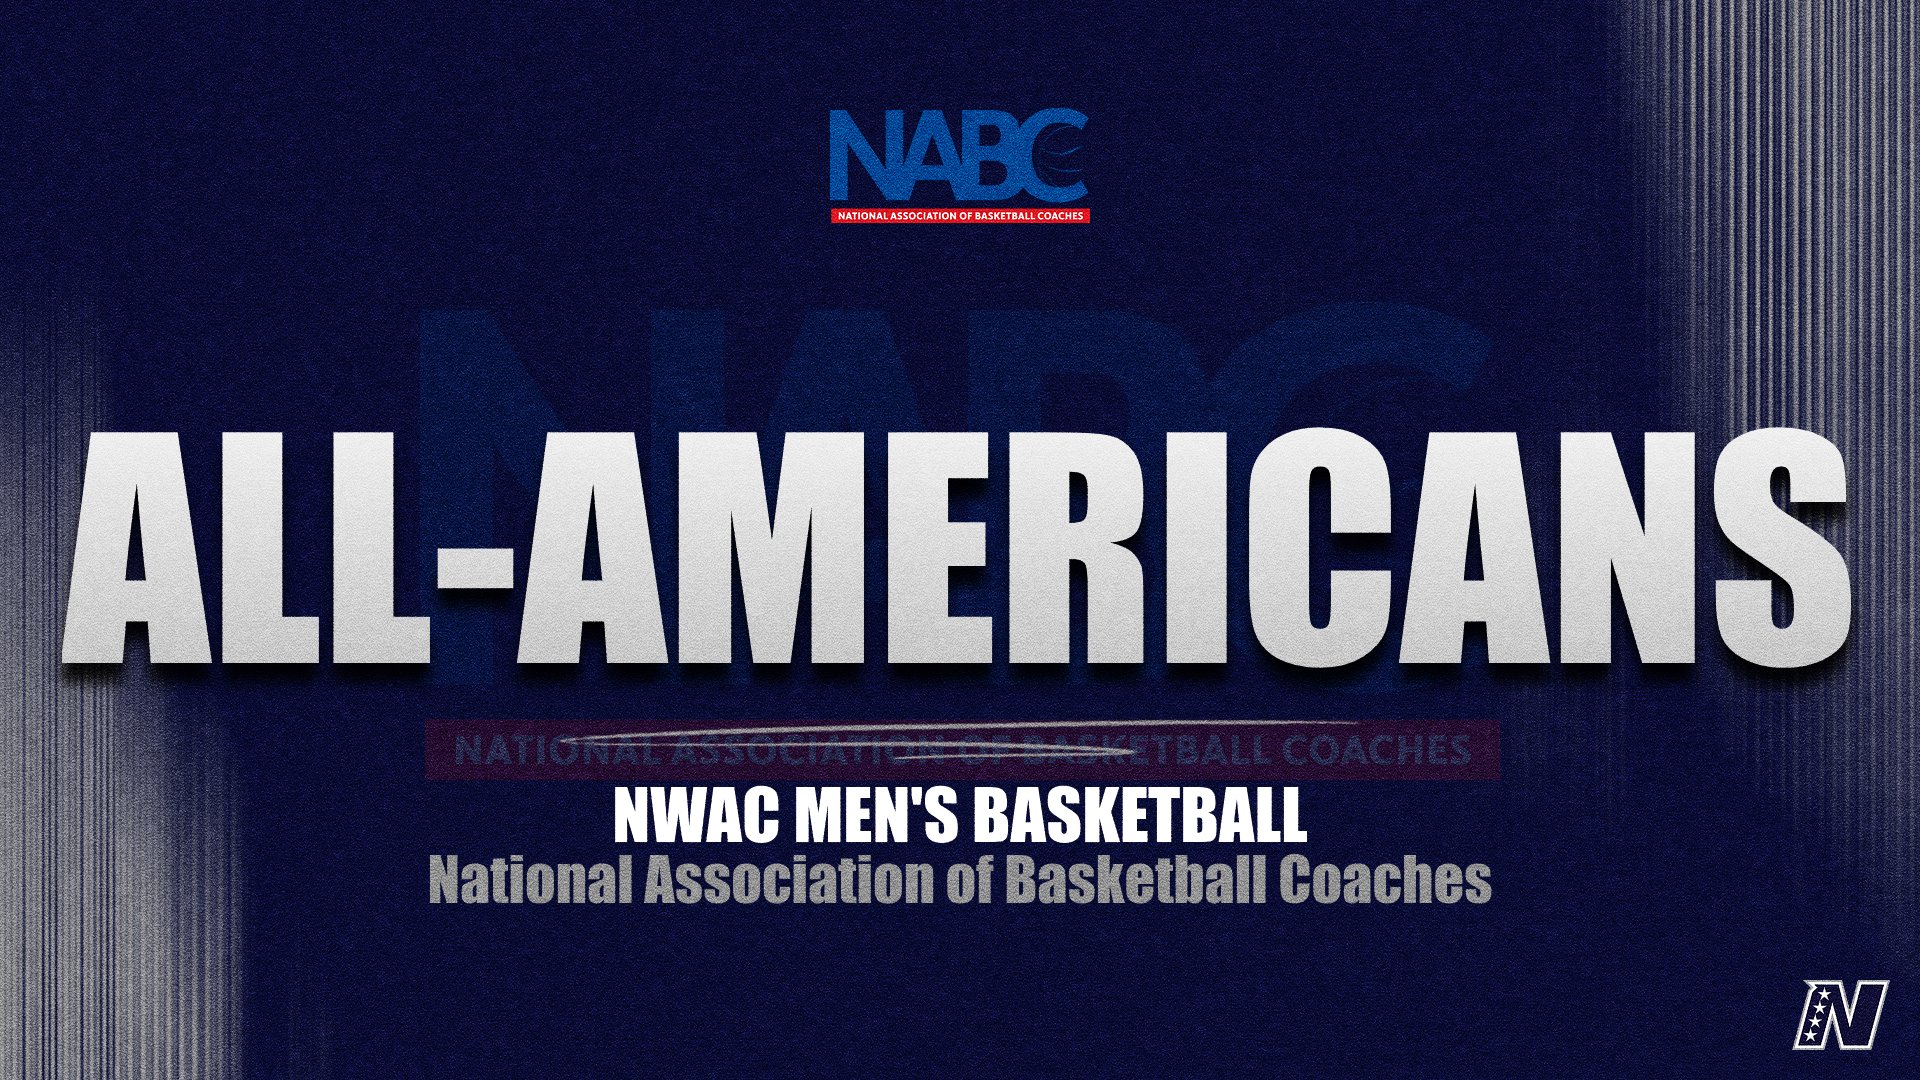 NABC Announces NWAC Men's Basketball All-Americans